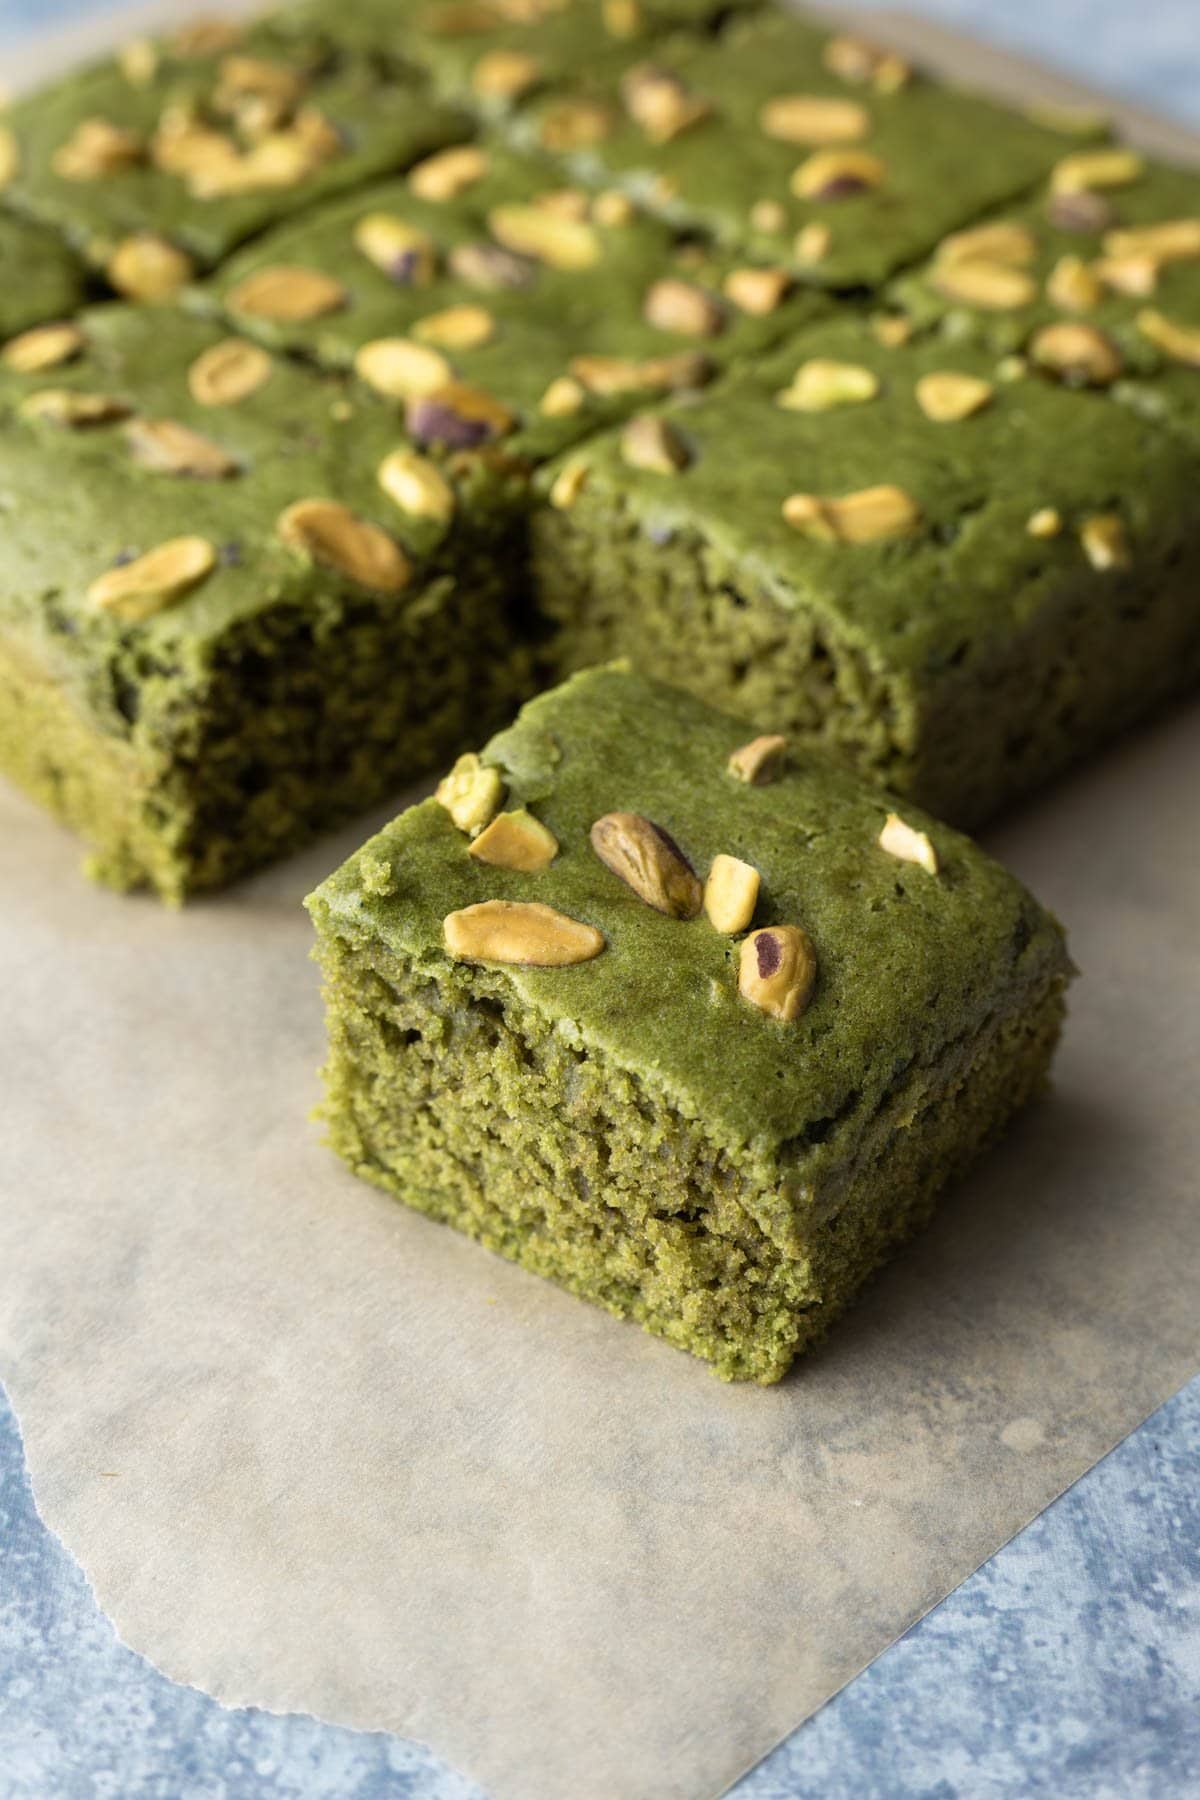 Square matcha cake with pistachios, cut into slices and resting on parchment paper.